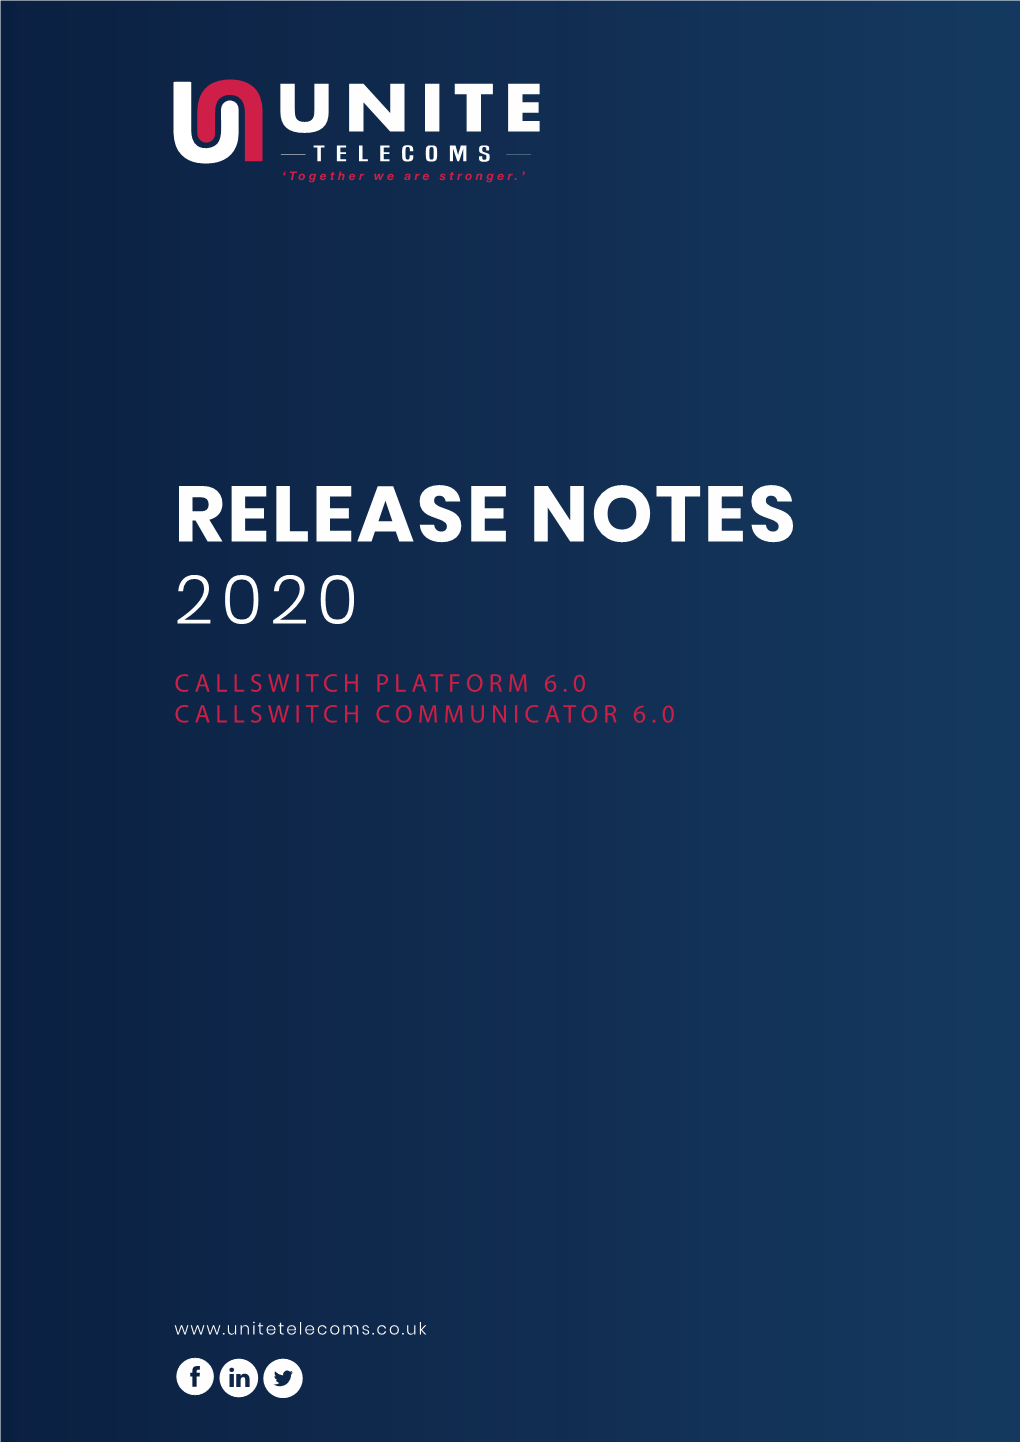 Release Notes 2020 Callswitch Platform 6.0 Callswitch Communicator 6.0